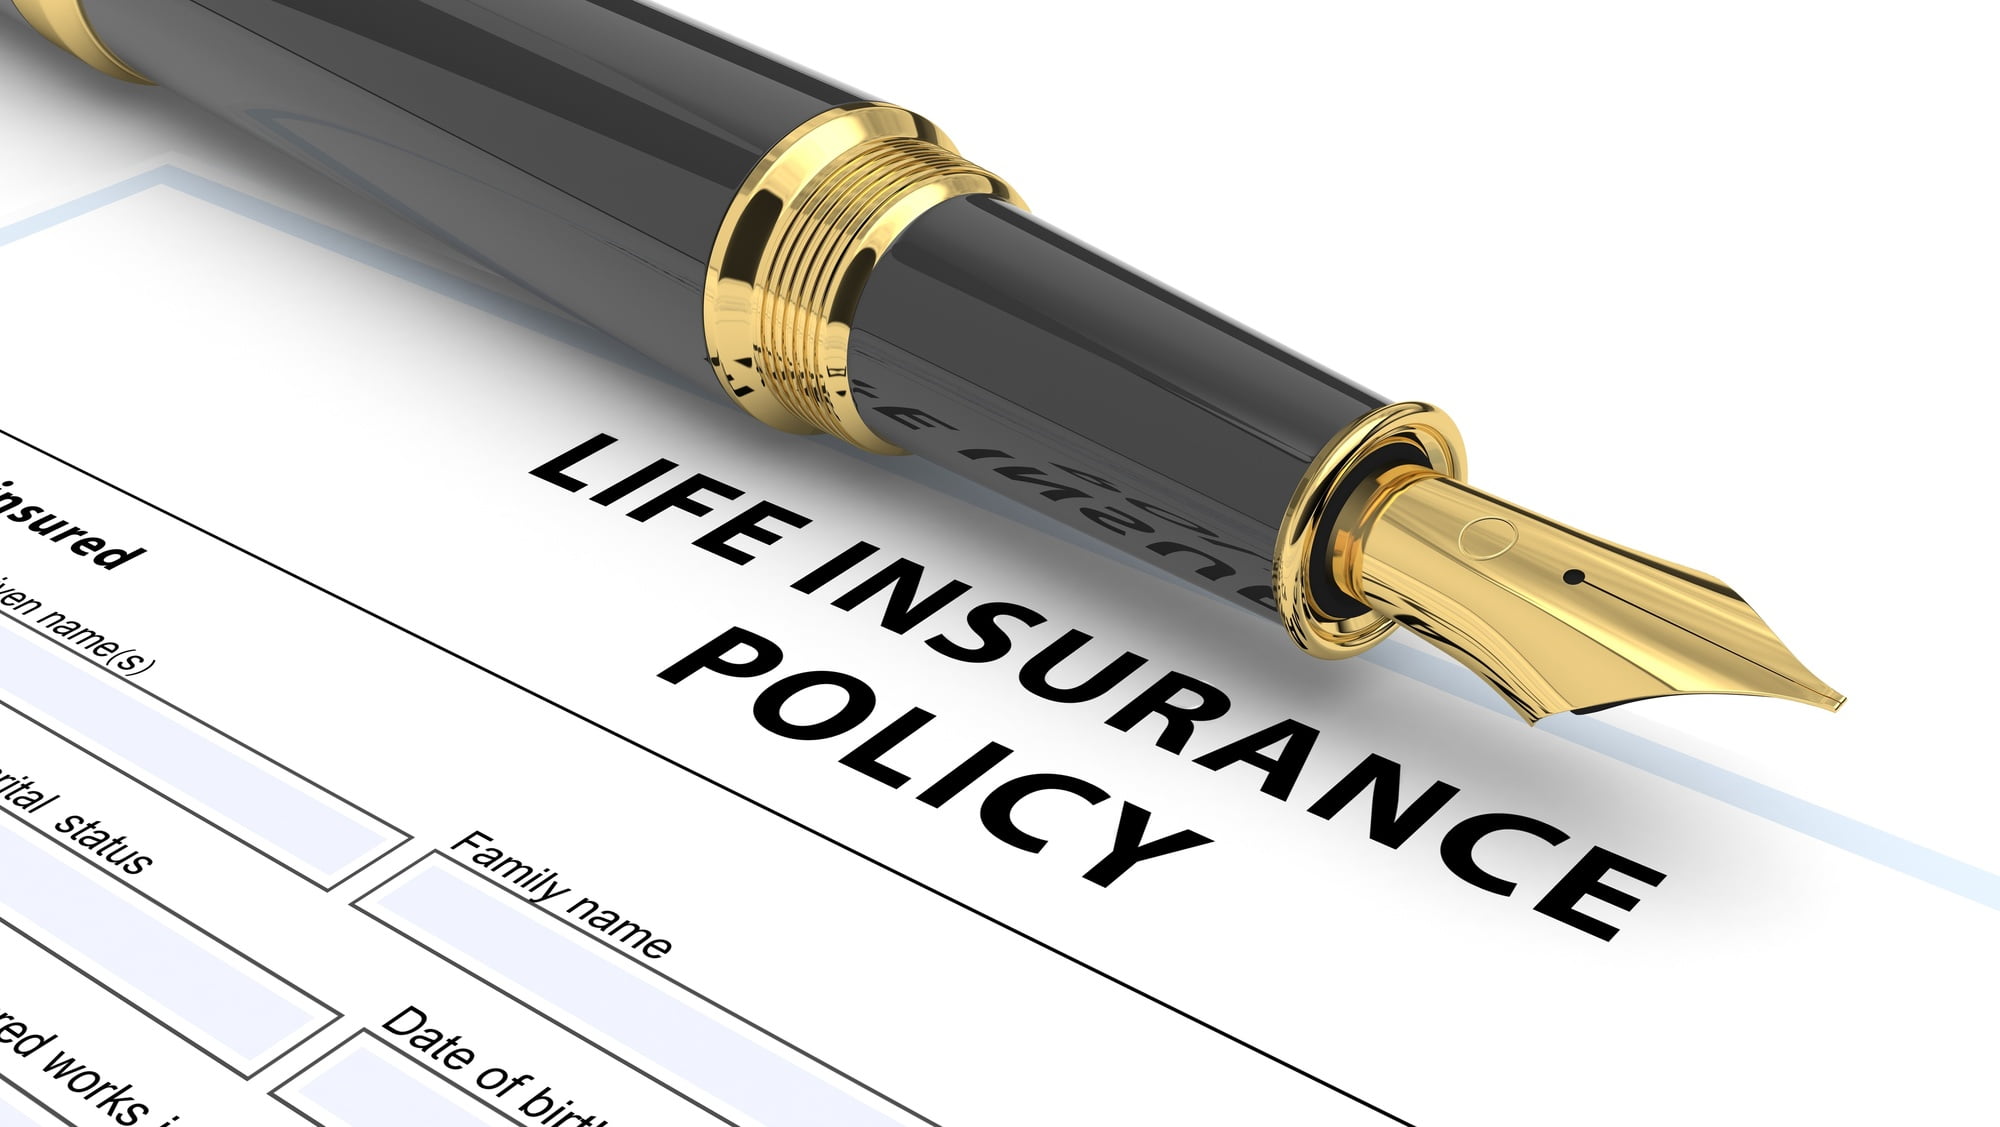 Read this straightforward guide to learn about the different types of life insurance coverage available and choose the right one for your needs.